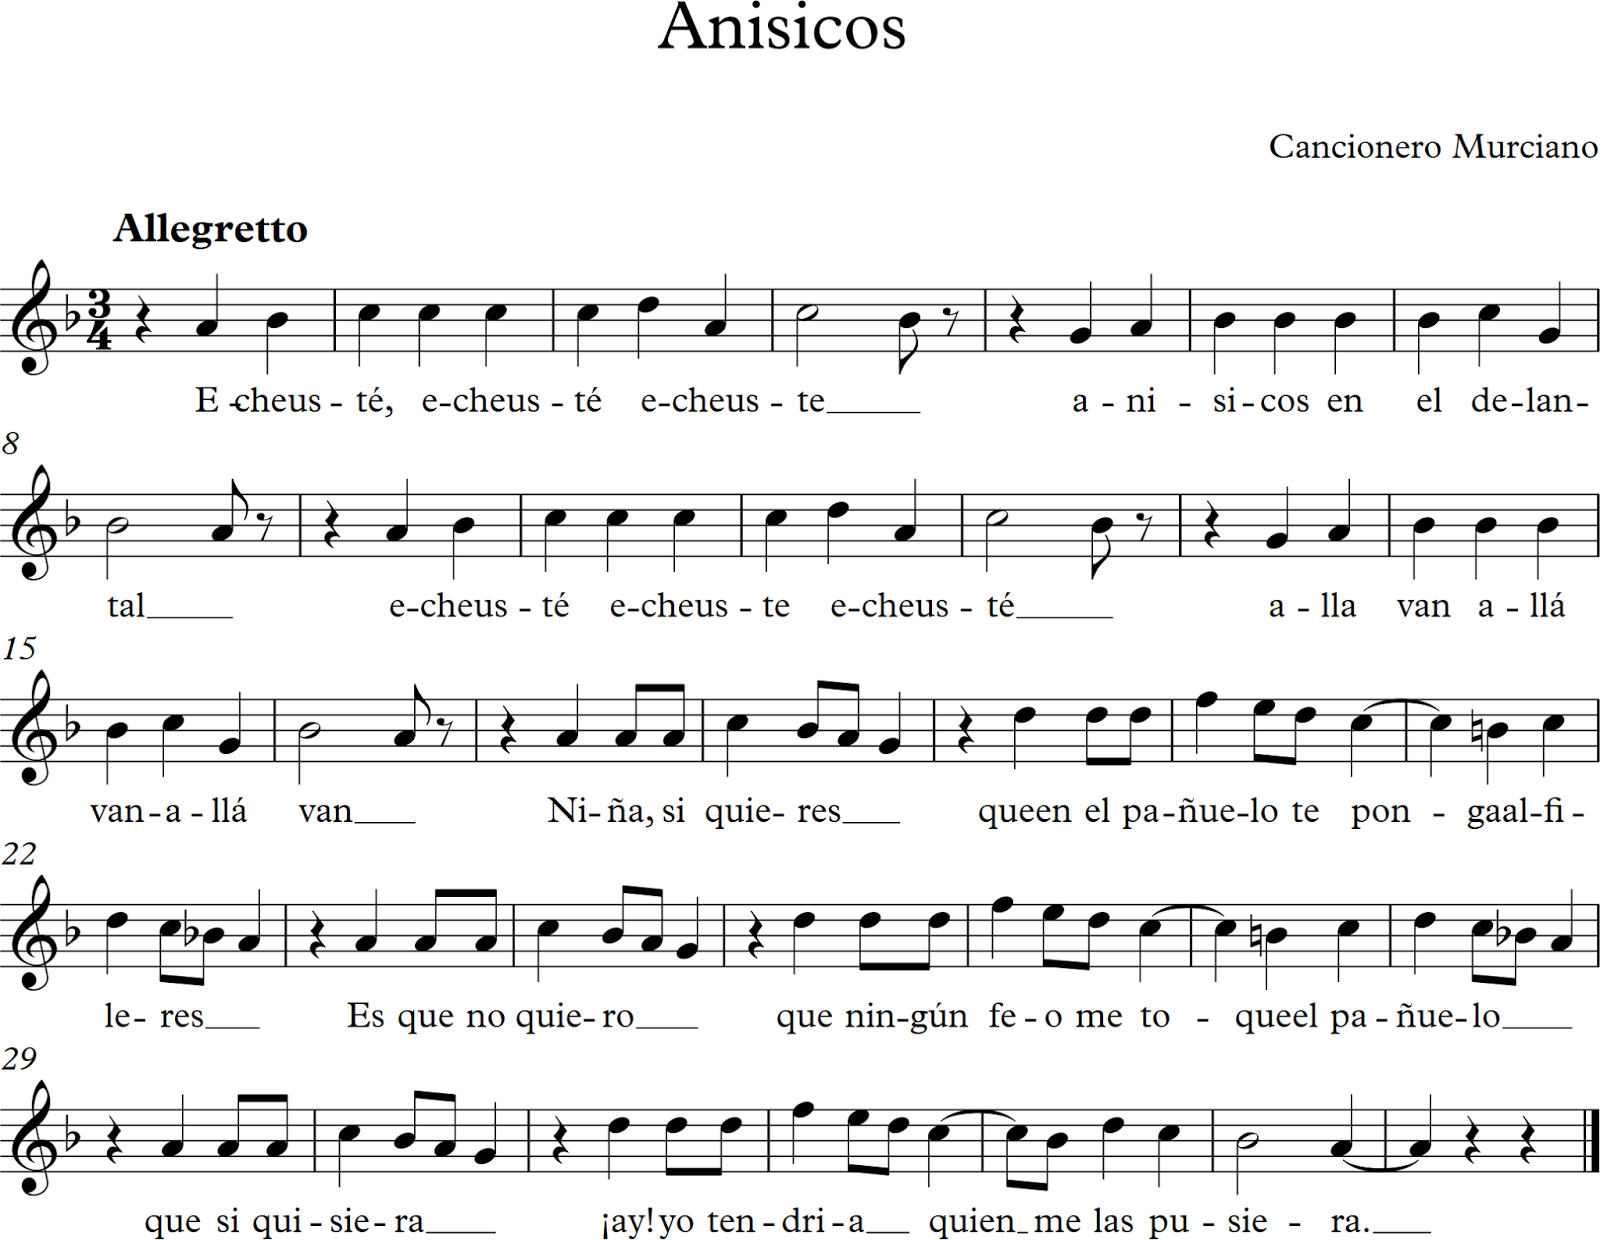 Anisicos (1).png